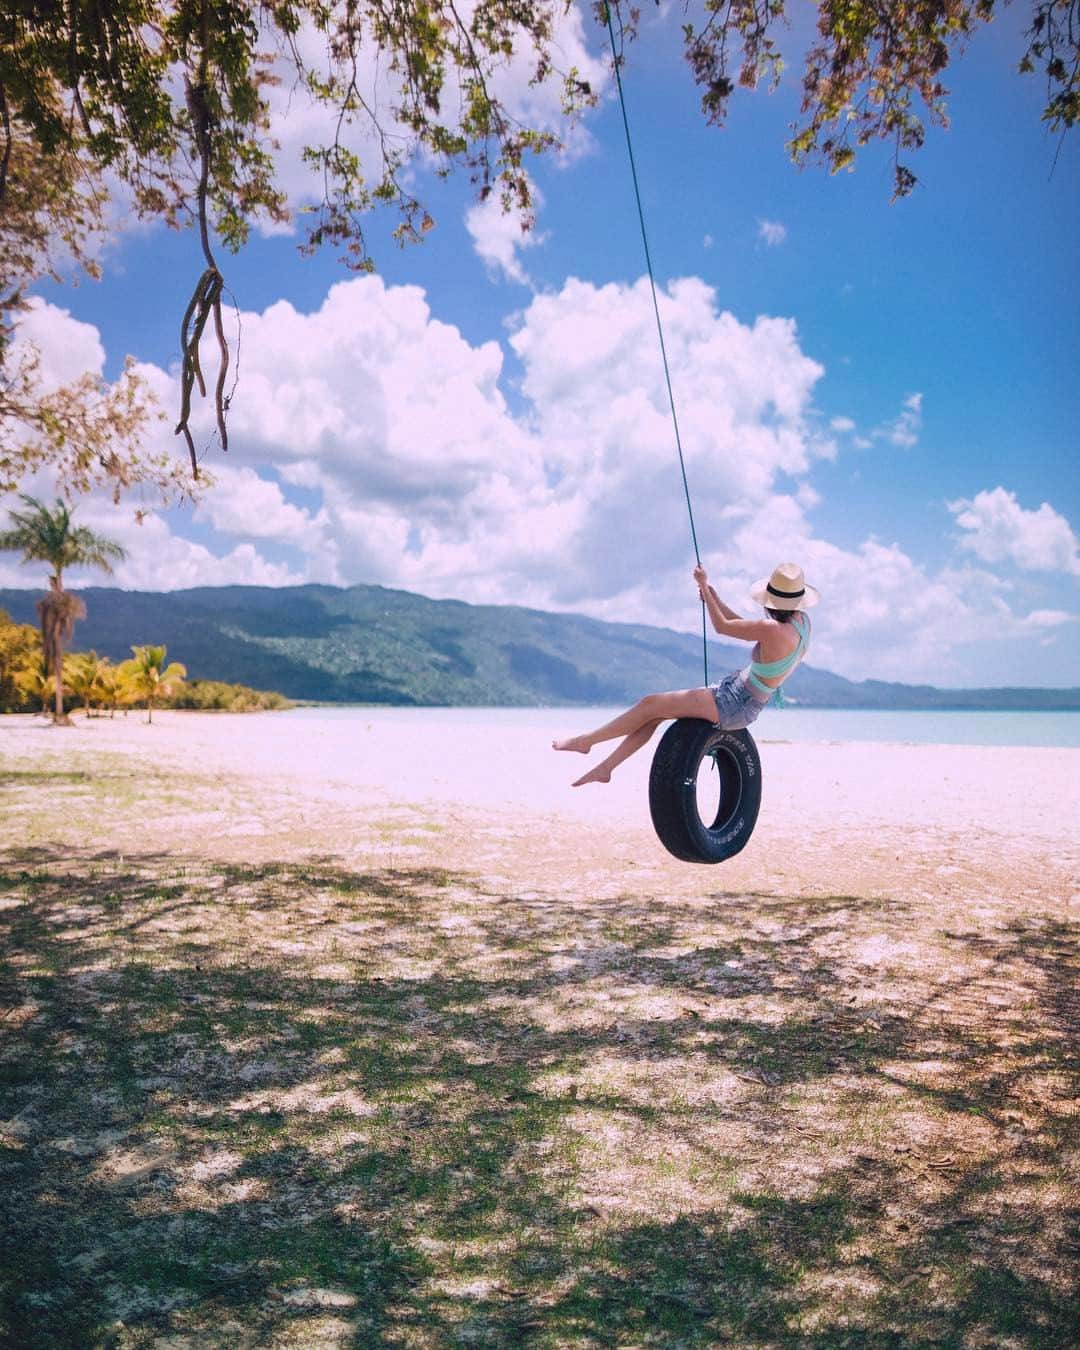 Cole Riseのインスタグラム：「swinging with the breeze on a private beach, with the goats and water buffalo. down a ways, you can find the cliff where Steve McQueen escaped in Papillon. not a bad way to spend the afternoon. #livefunner @visitjamaica」